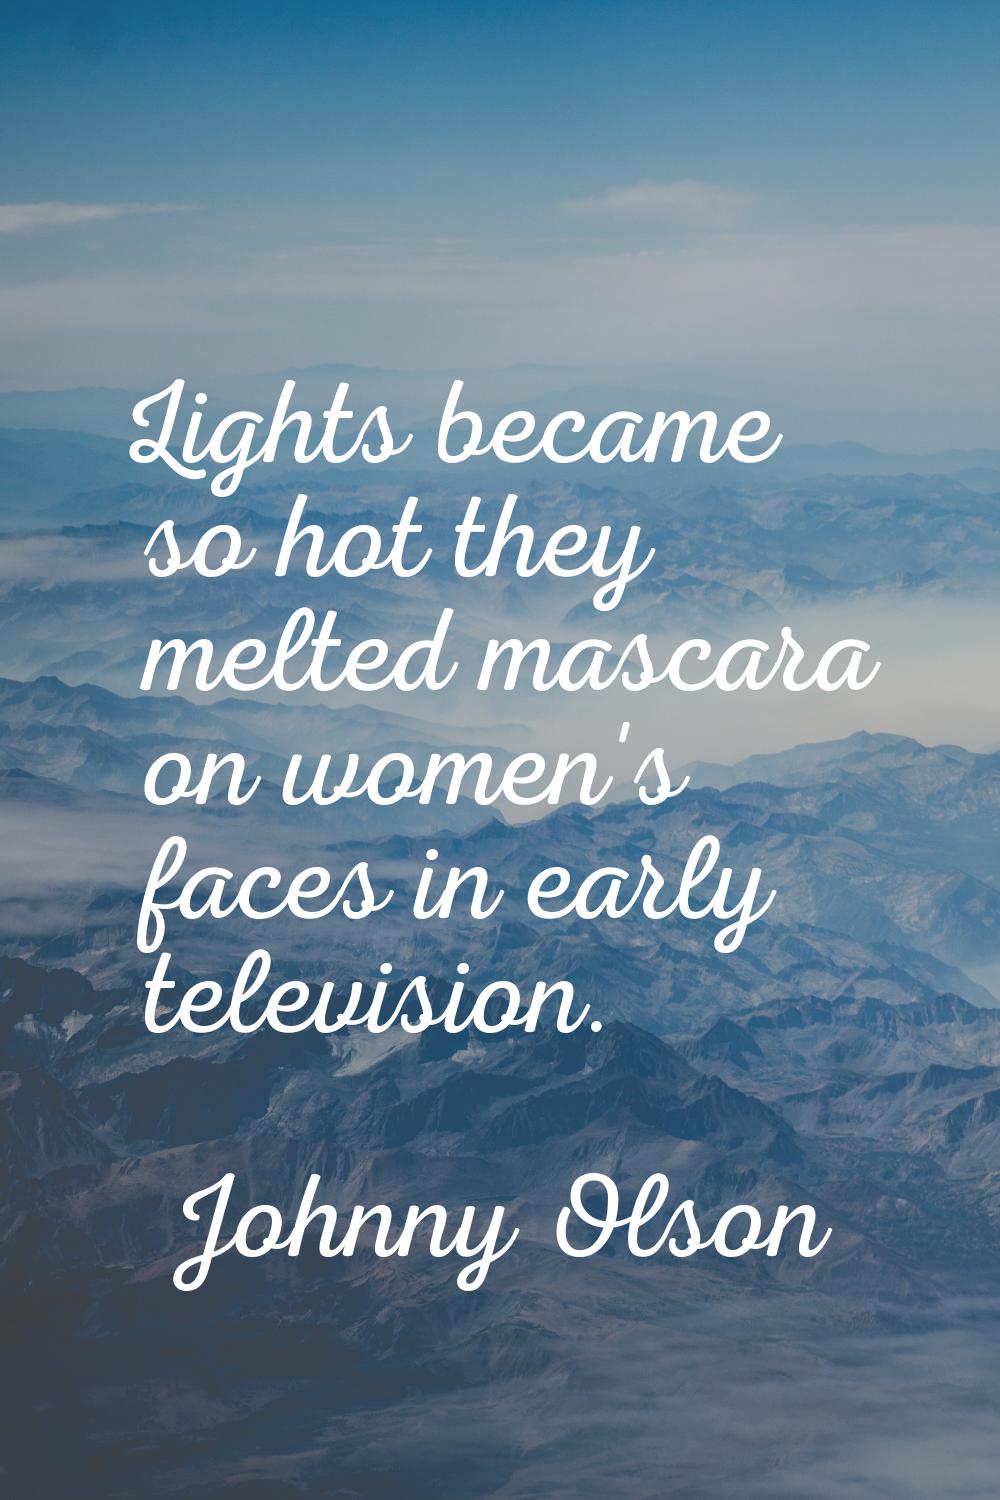 Lights became so hot they melted mascara on women's faces in early television.